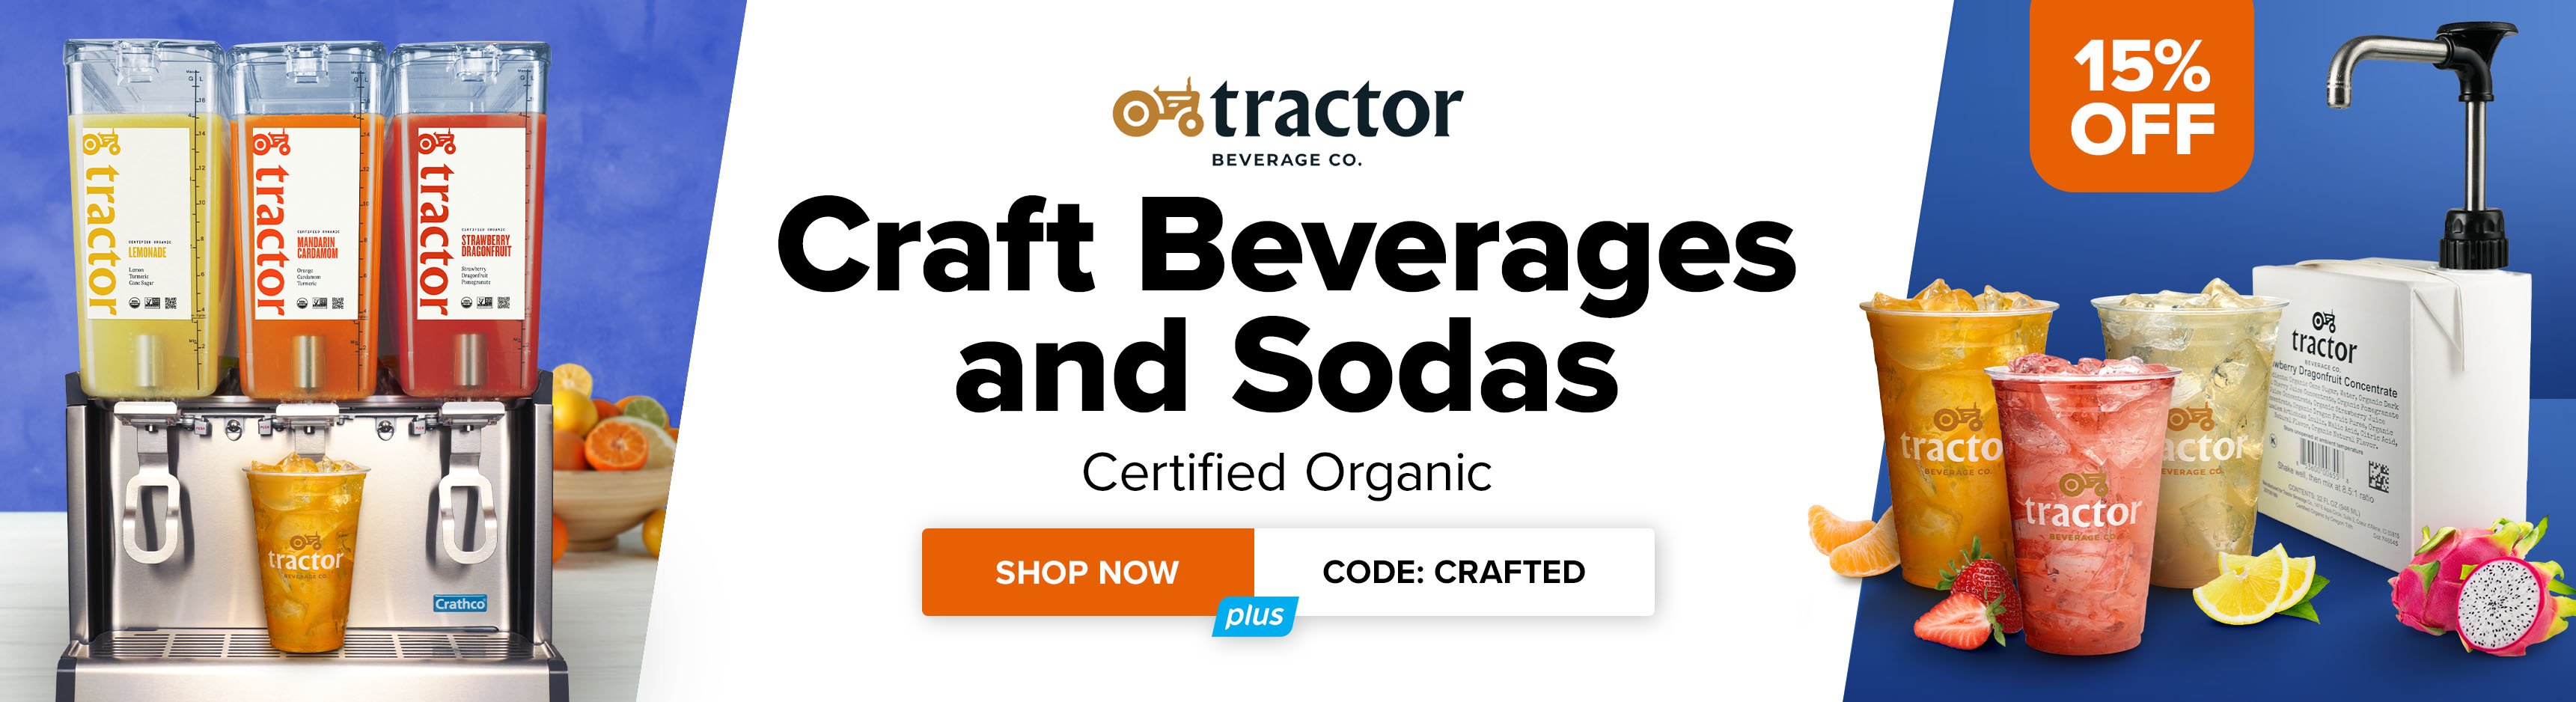 15% off Tractor craft beverages and sodas